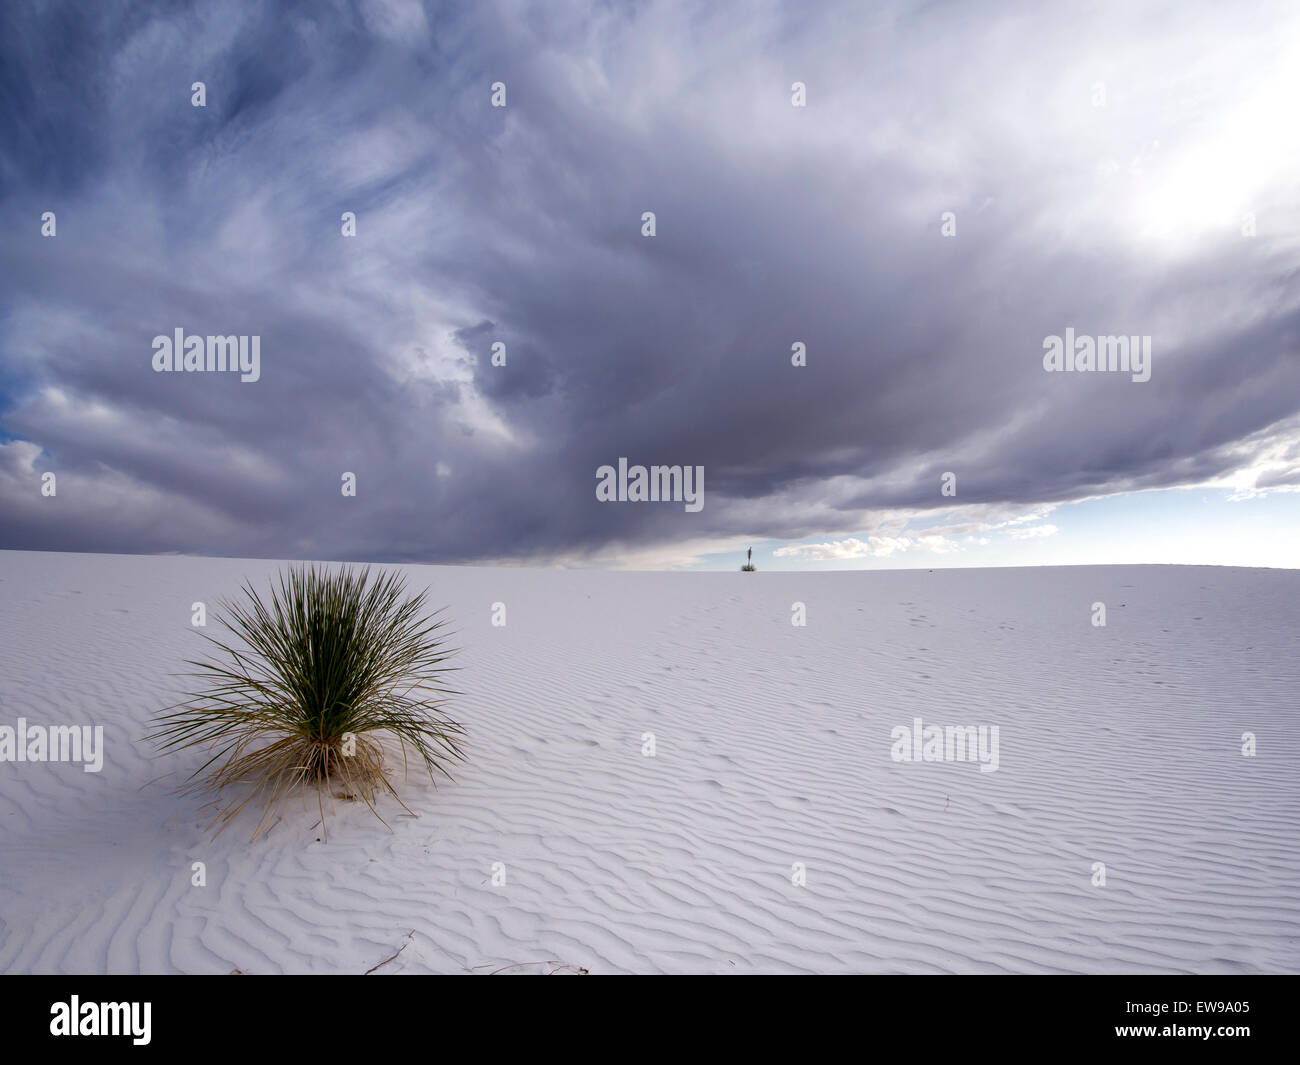 Dramatic Landscape - White Sand Desert with Approaching Storm Stock Photo